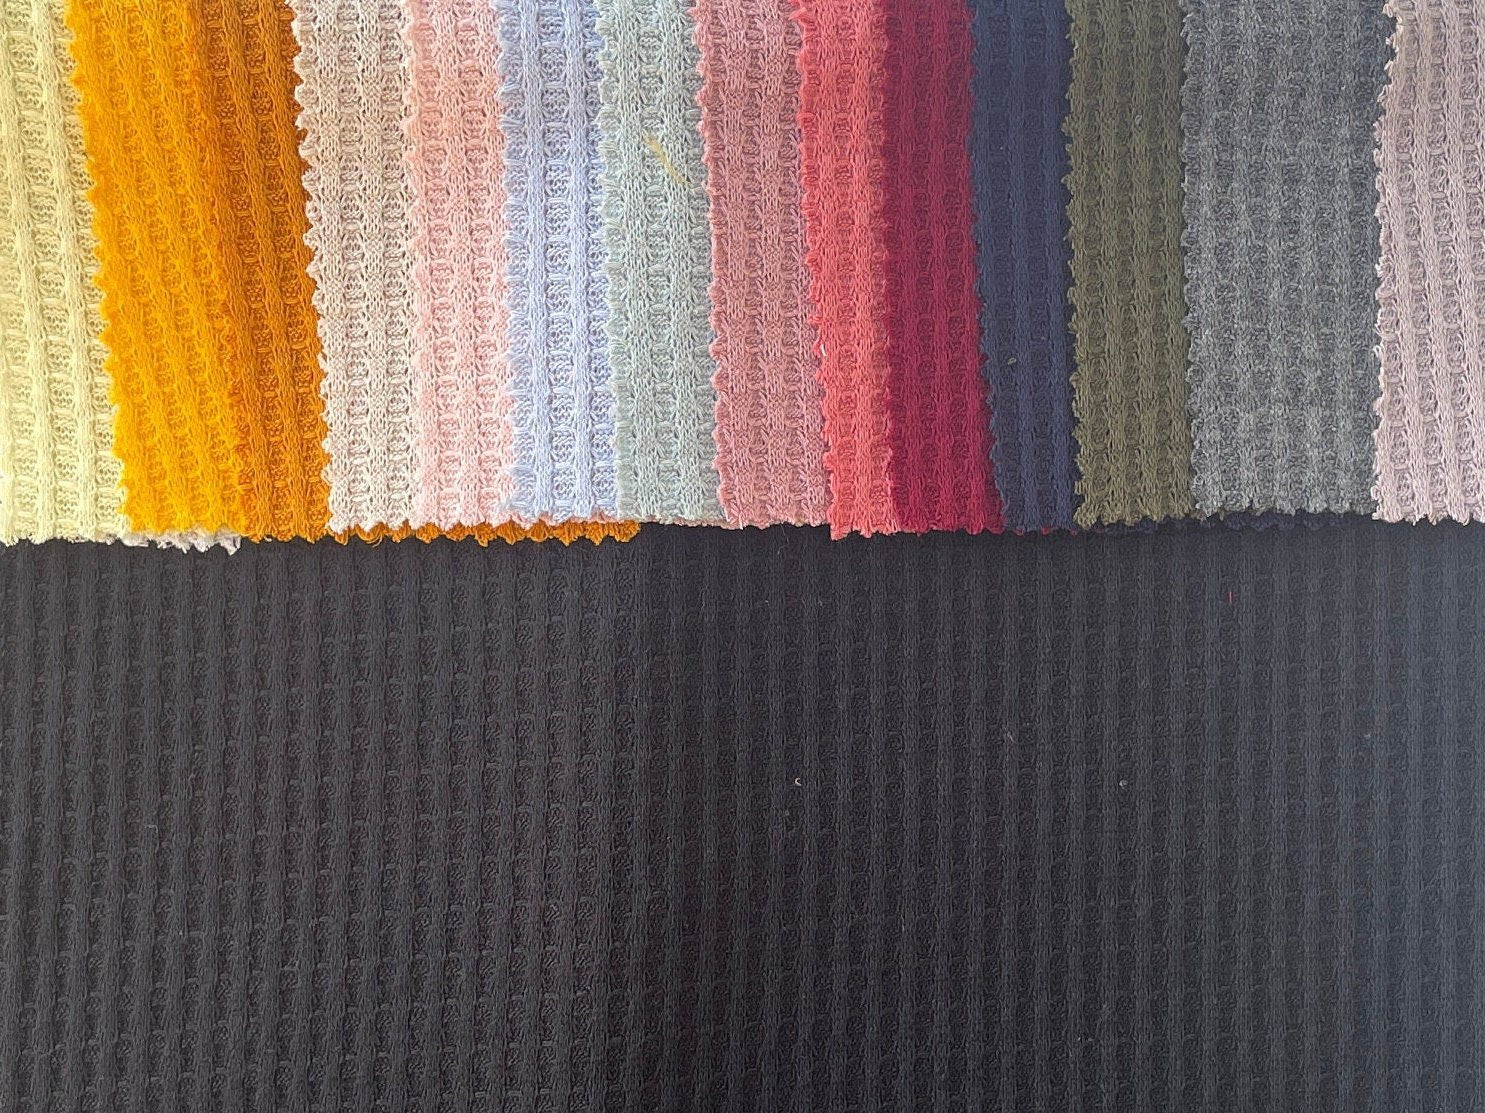 waffle knit fabric : 200 gsm, 100% Polyester, Dyed, Circular terry